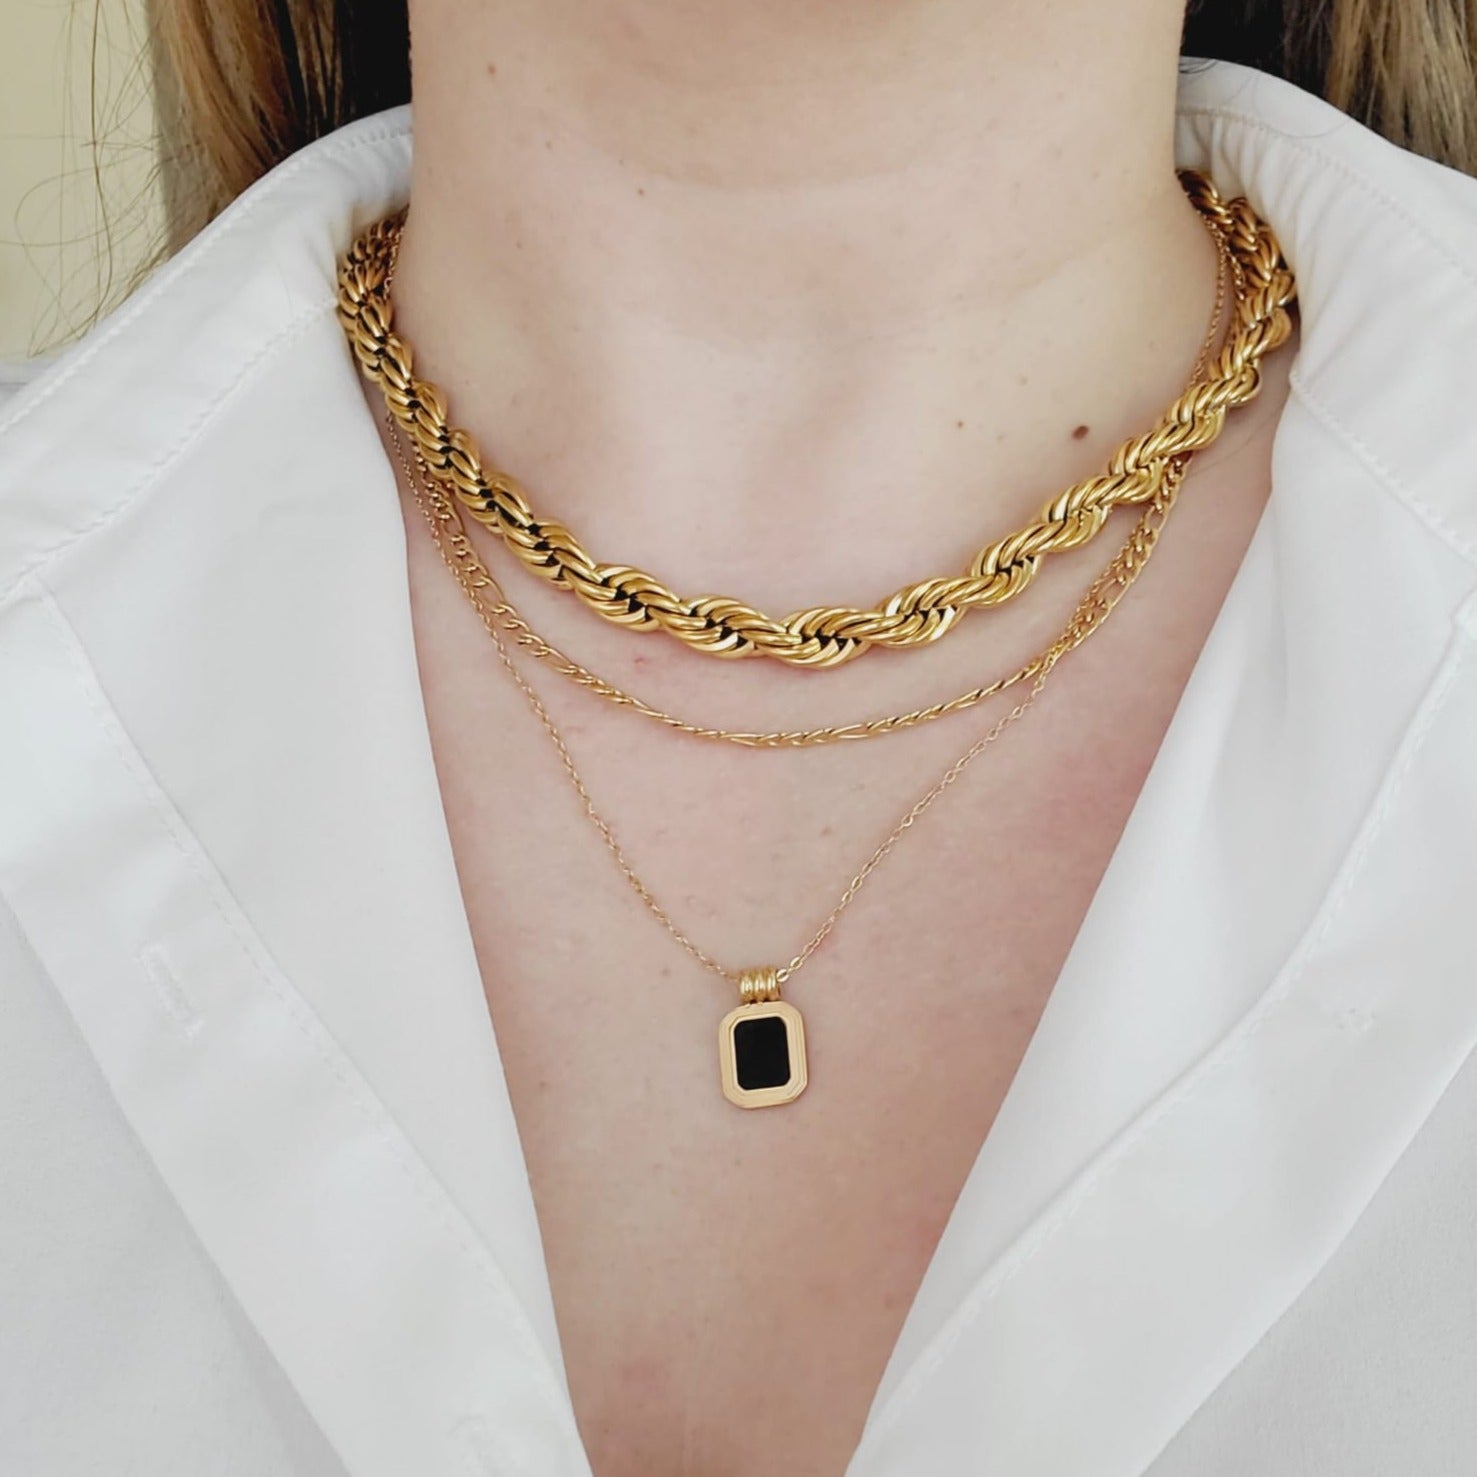 Minimalist chain, Gold filled Chain, Flat Gold Necklace, Snake Chain, Water resistant jewelry, water resistant Necklace, Water resistant bracelet, vintage jewelry, vintage jewelry, vintage necklace, 14k gold necklace, 14k gold jewelry, 14k gold necklace, fine jewelry, fine necklace, fine bracelet, snake gold necklace, bold necklace, bold jewelry, handmade jewelry, fine jewelry brand, the views and co, ellie vail jewelry, hey harper jewelry